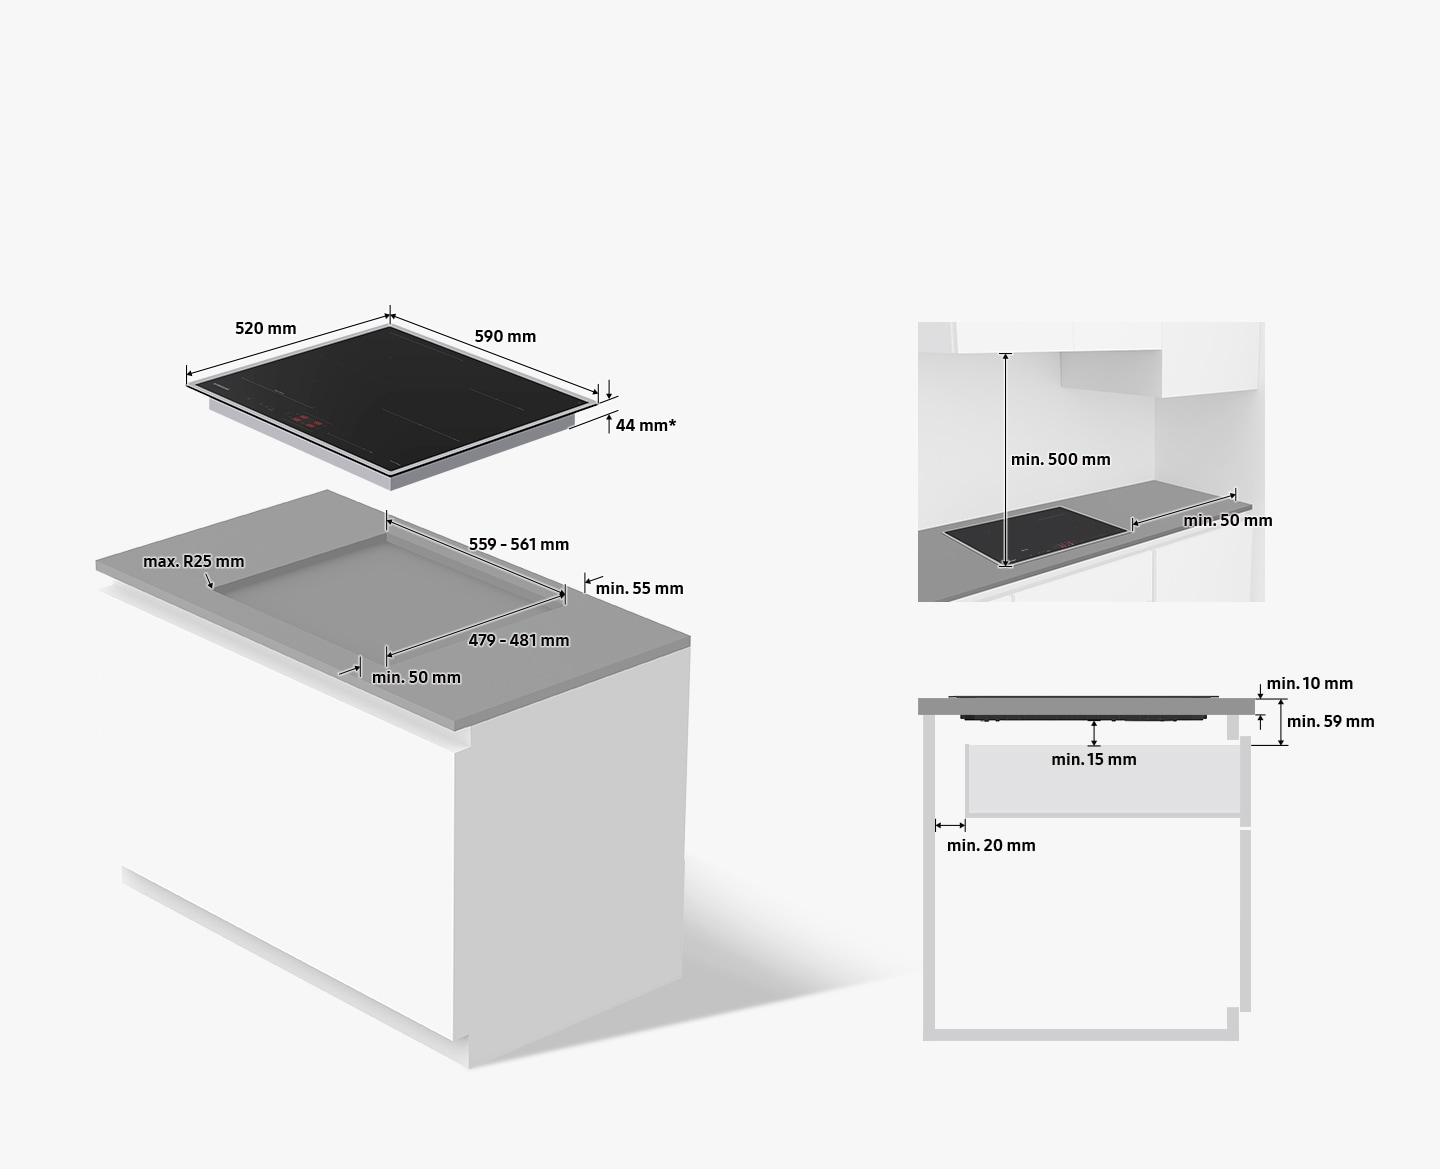 The cooktop measures 590mm wide, 520mm deep, and 44mm high. The 44mm* height must fit inside the countertop cutout. Countertop cutouts must be 559-561mm wide, 479-481mm deep, and less than R25mm round corners. There must be at least 55mm of uncut space on the back of the cutout and at least 50mm of uncut space on the front of the cutout. The minimum height of 15mm under the cooktop plus the minimum thickness of the countertop of 10mm must be at least 59mm. Drawers installed under the cooktop must be at least 20mm from the rear wall. When the cooktop is installed, there must be at least 500mm of space above the cooktop and at least 50mm to the right of the cooktop.